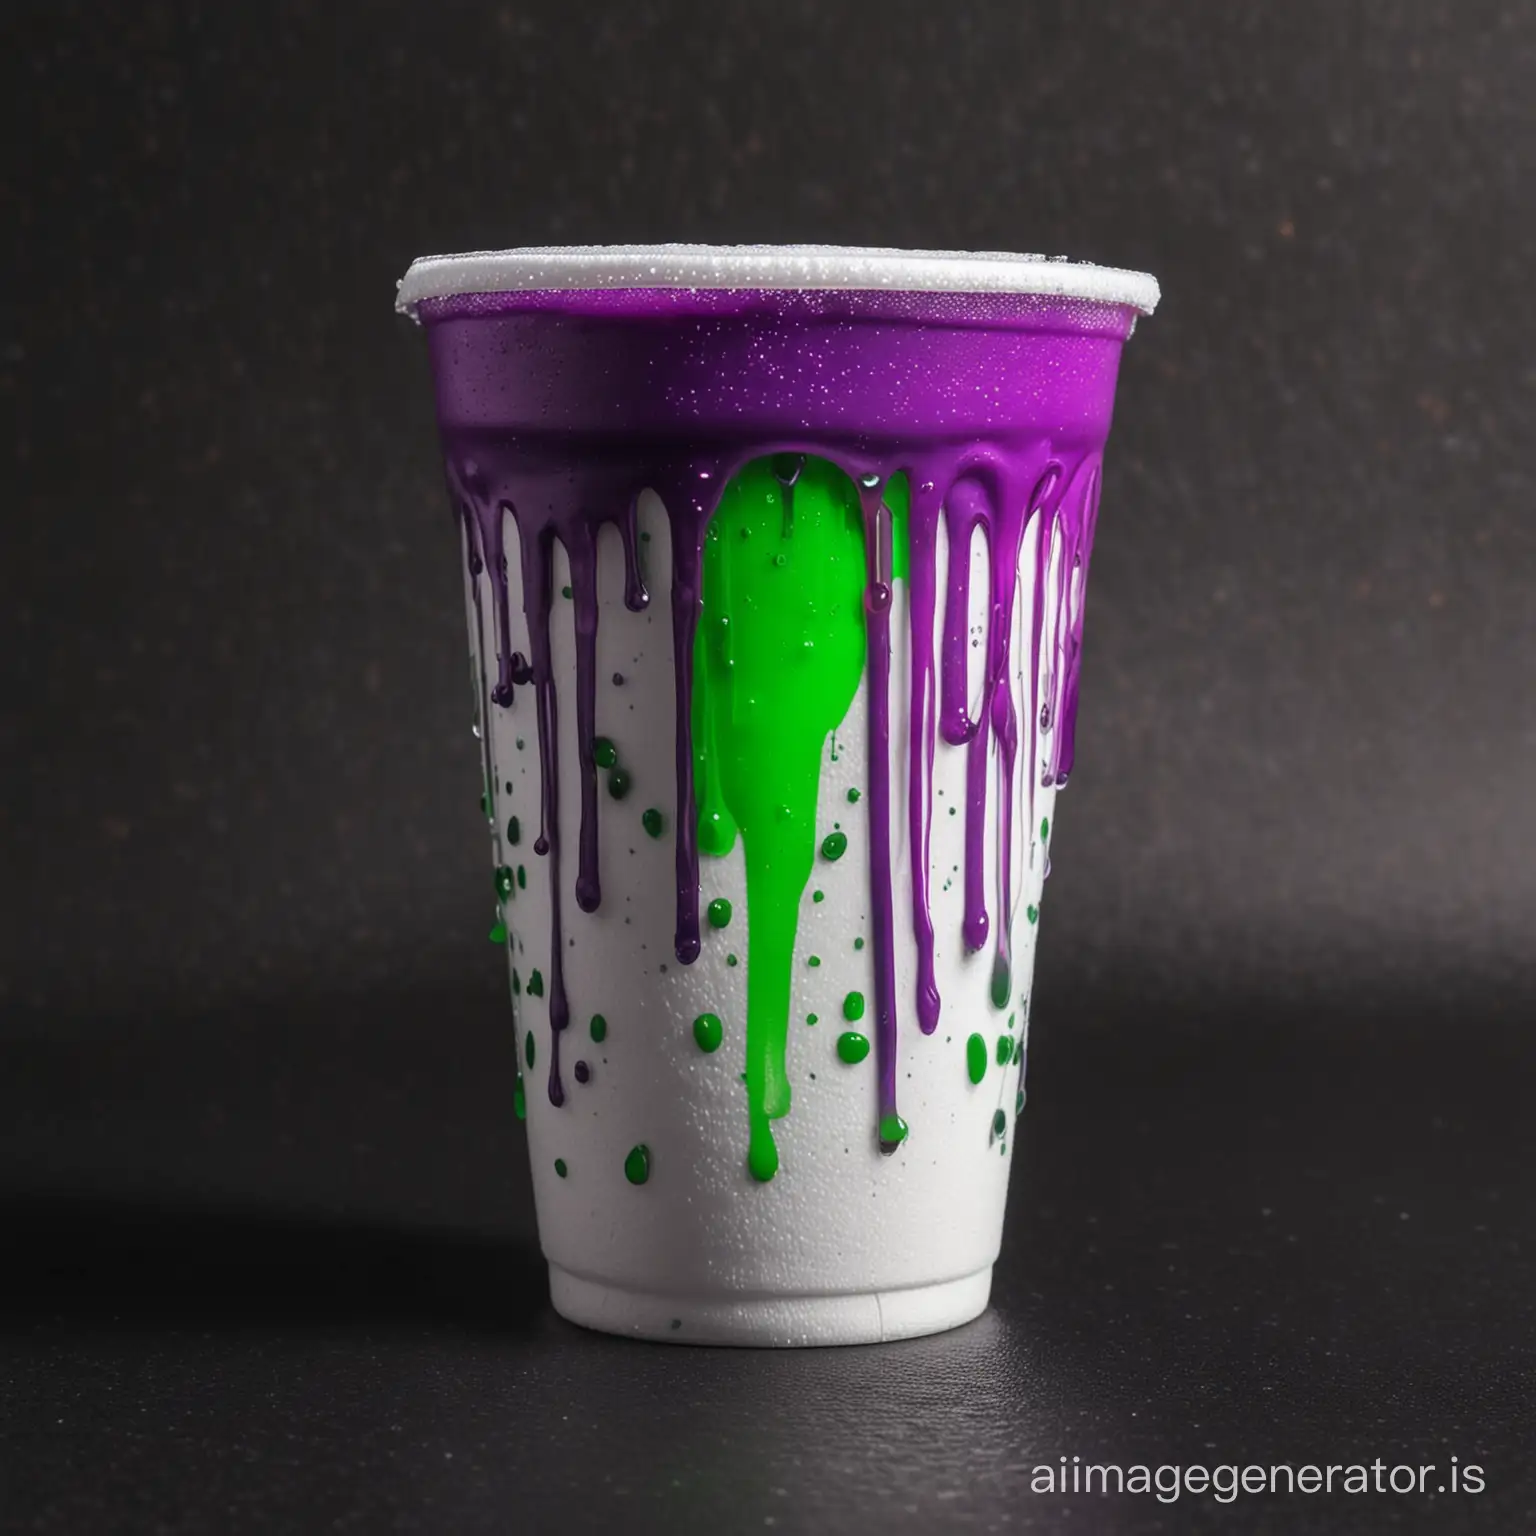 White styrofoam cup, neon green liquid inside, with neon green and purple drops of it - black back ground